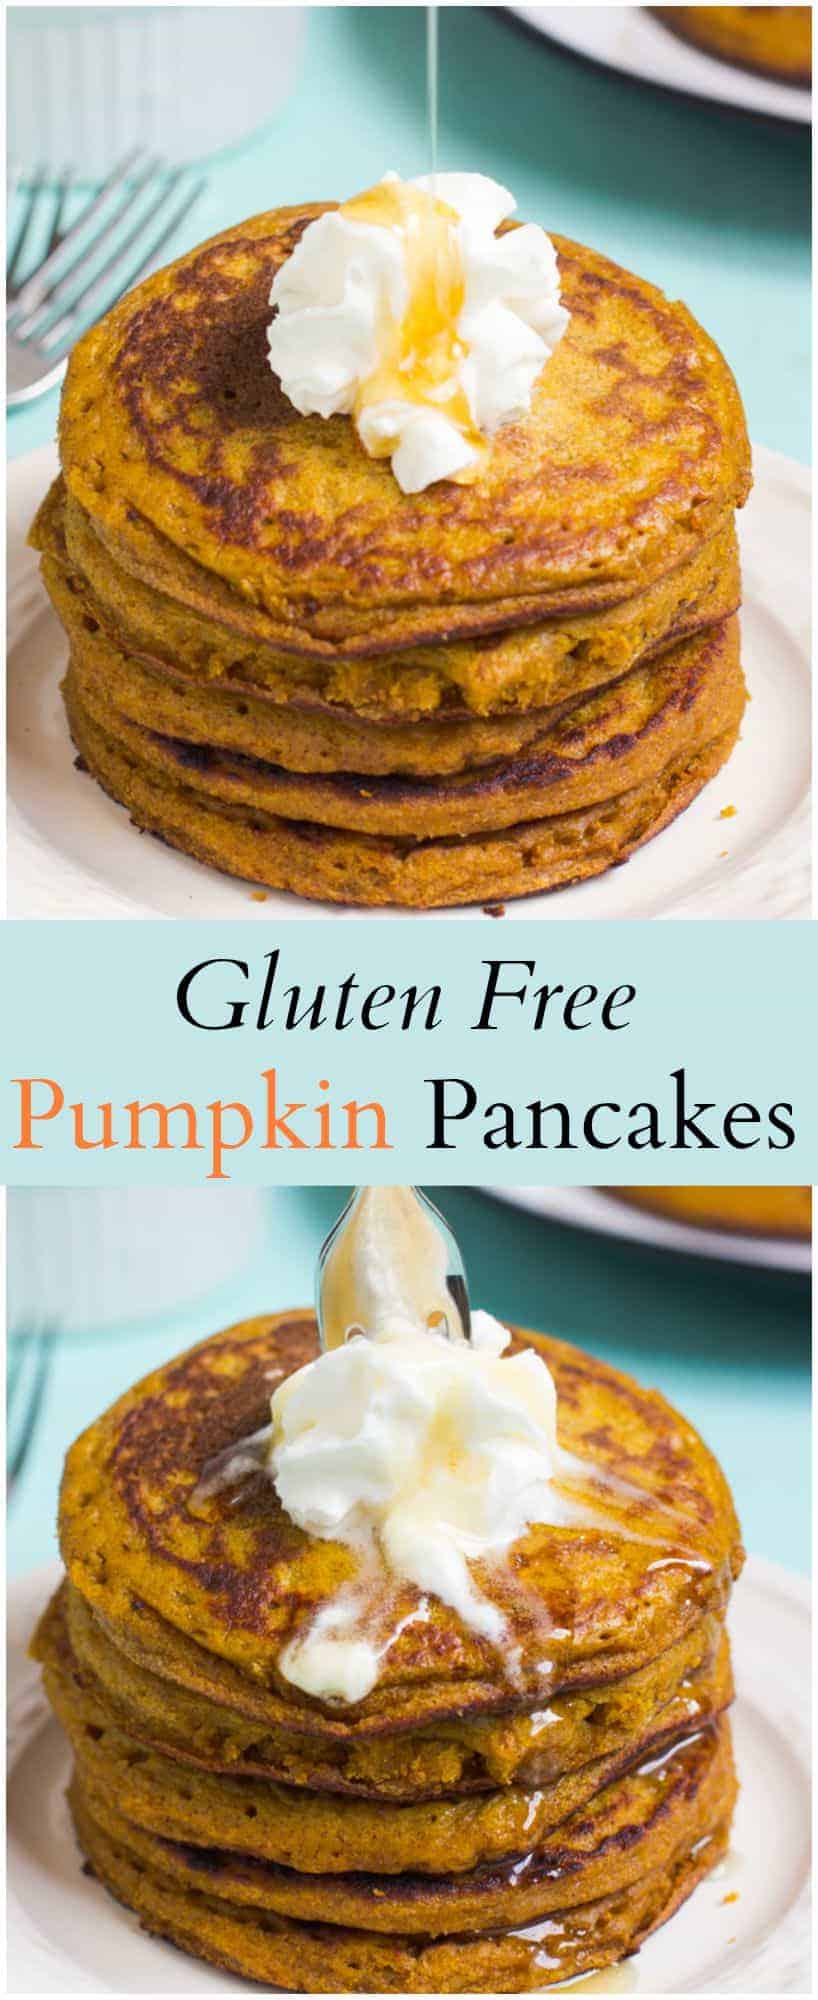 These Gluten Free Pumpkin Pancakes are melt-in-your-mouth pancakes! Light and fluffy, these gluten free pancakes take only 10 minutes to make! via https://jessicainthekitchen.com